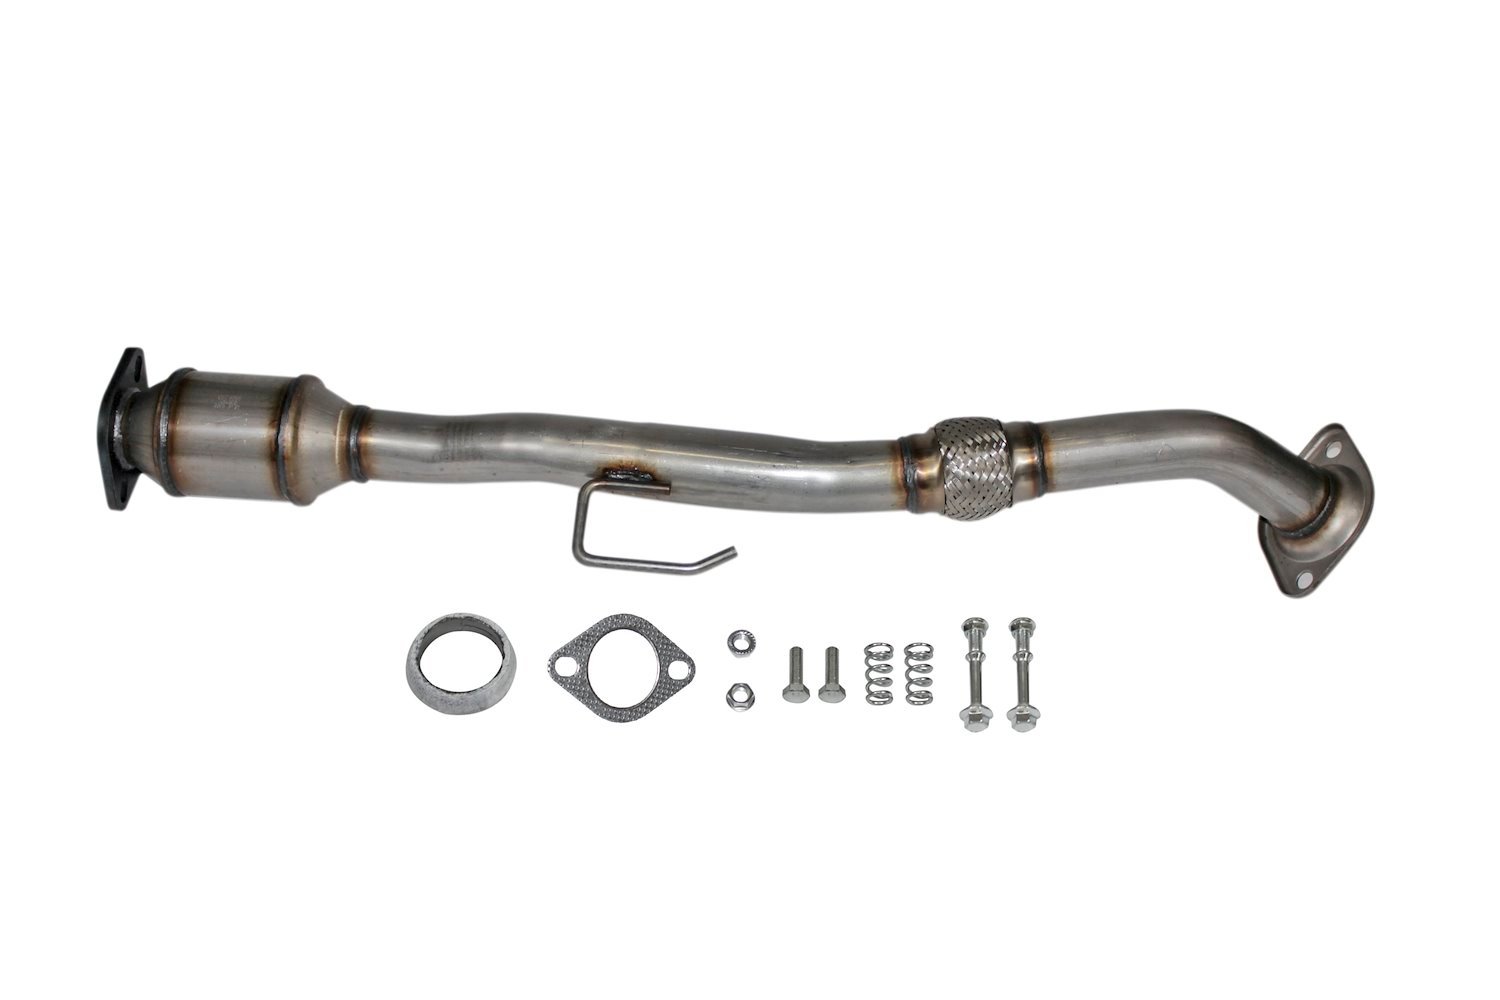 Catalytic Converter Fits 2002-2006 Nissan Altima w/2.5L 4 cyl. Eng. [Rear]